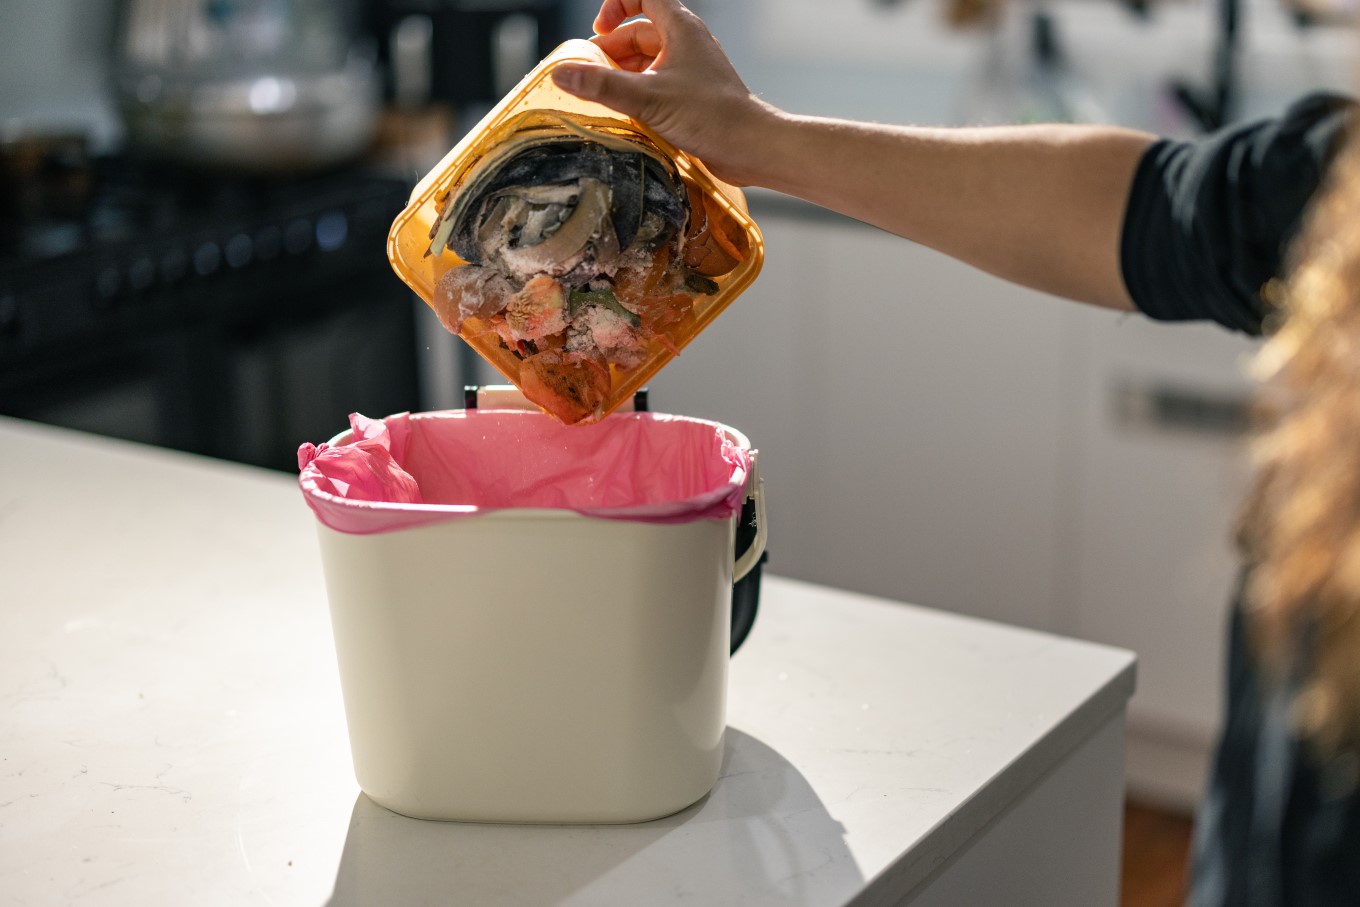 If you don’t want to smell your food scraps, freeze them in a smaller container. This is a handy hack to avoid meat scraps sitting in the benchtop caddy all week.